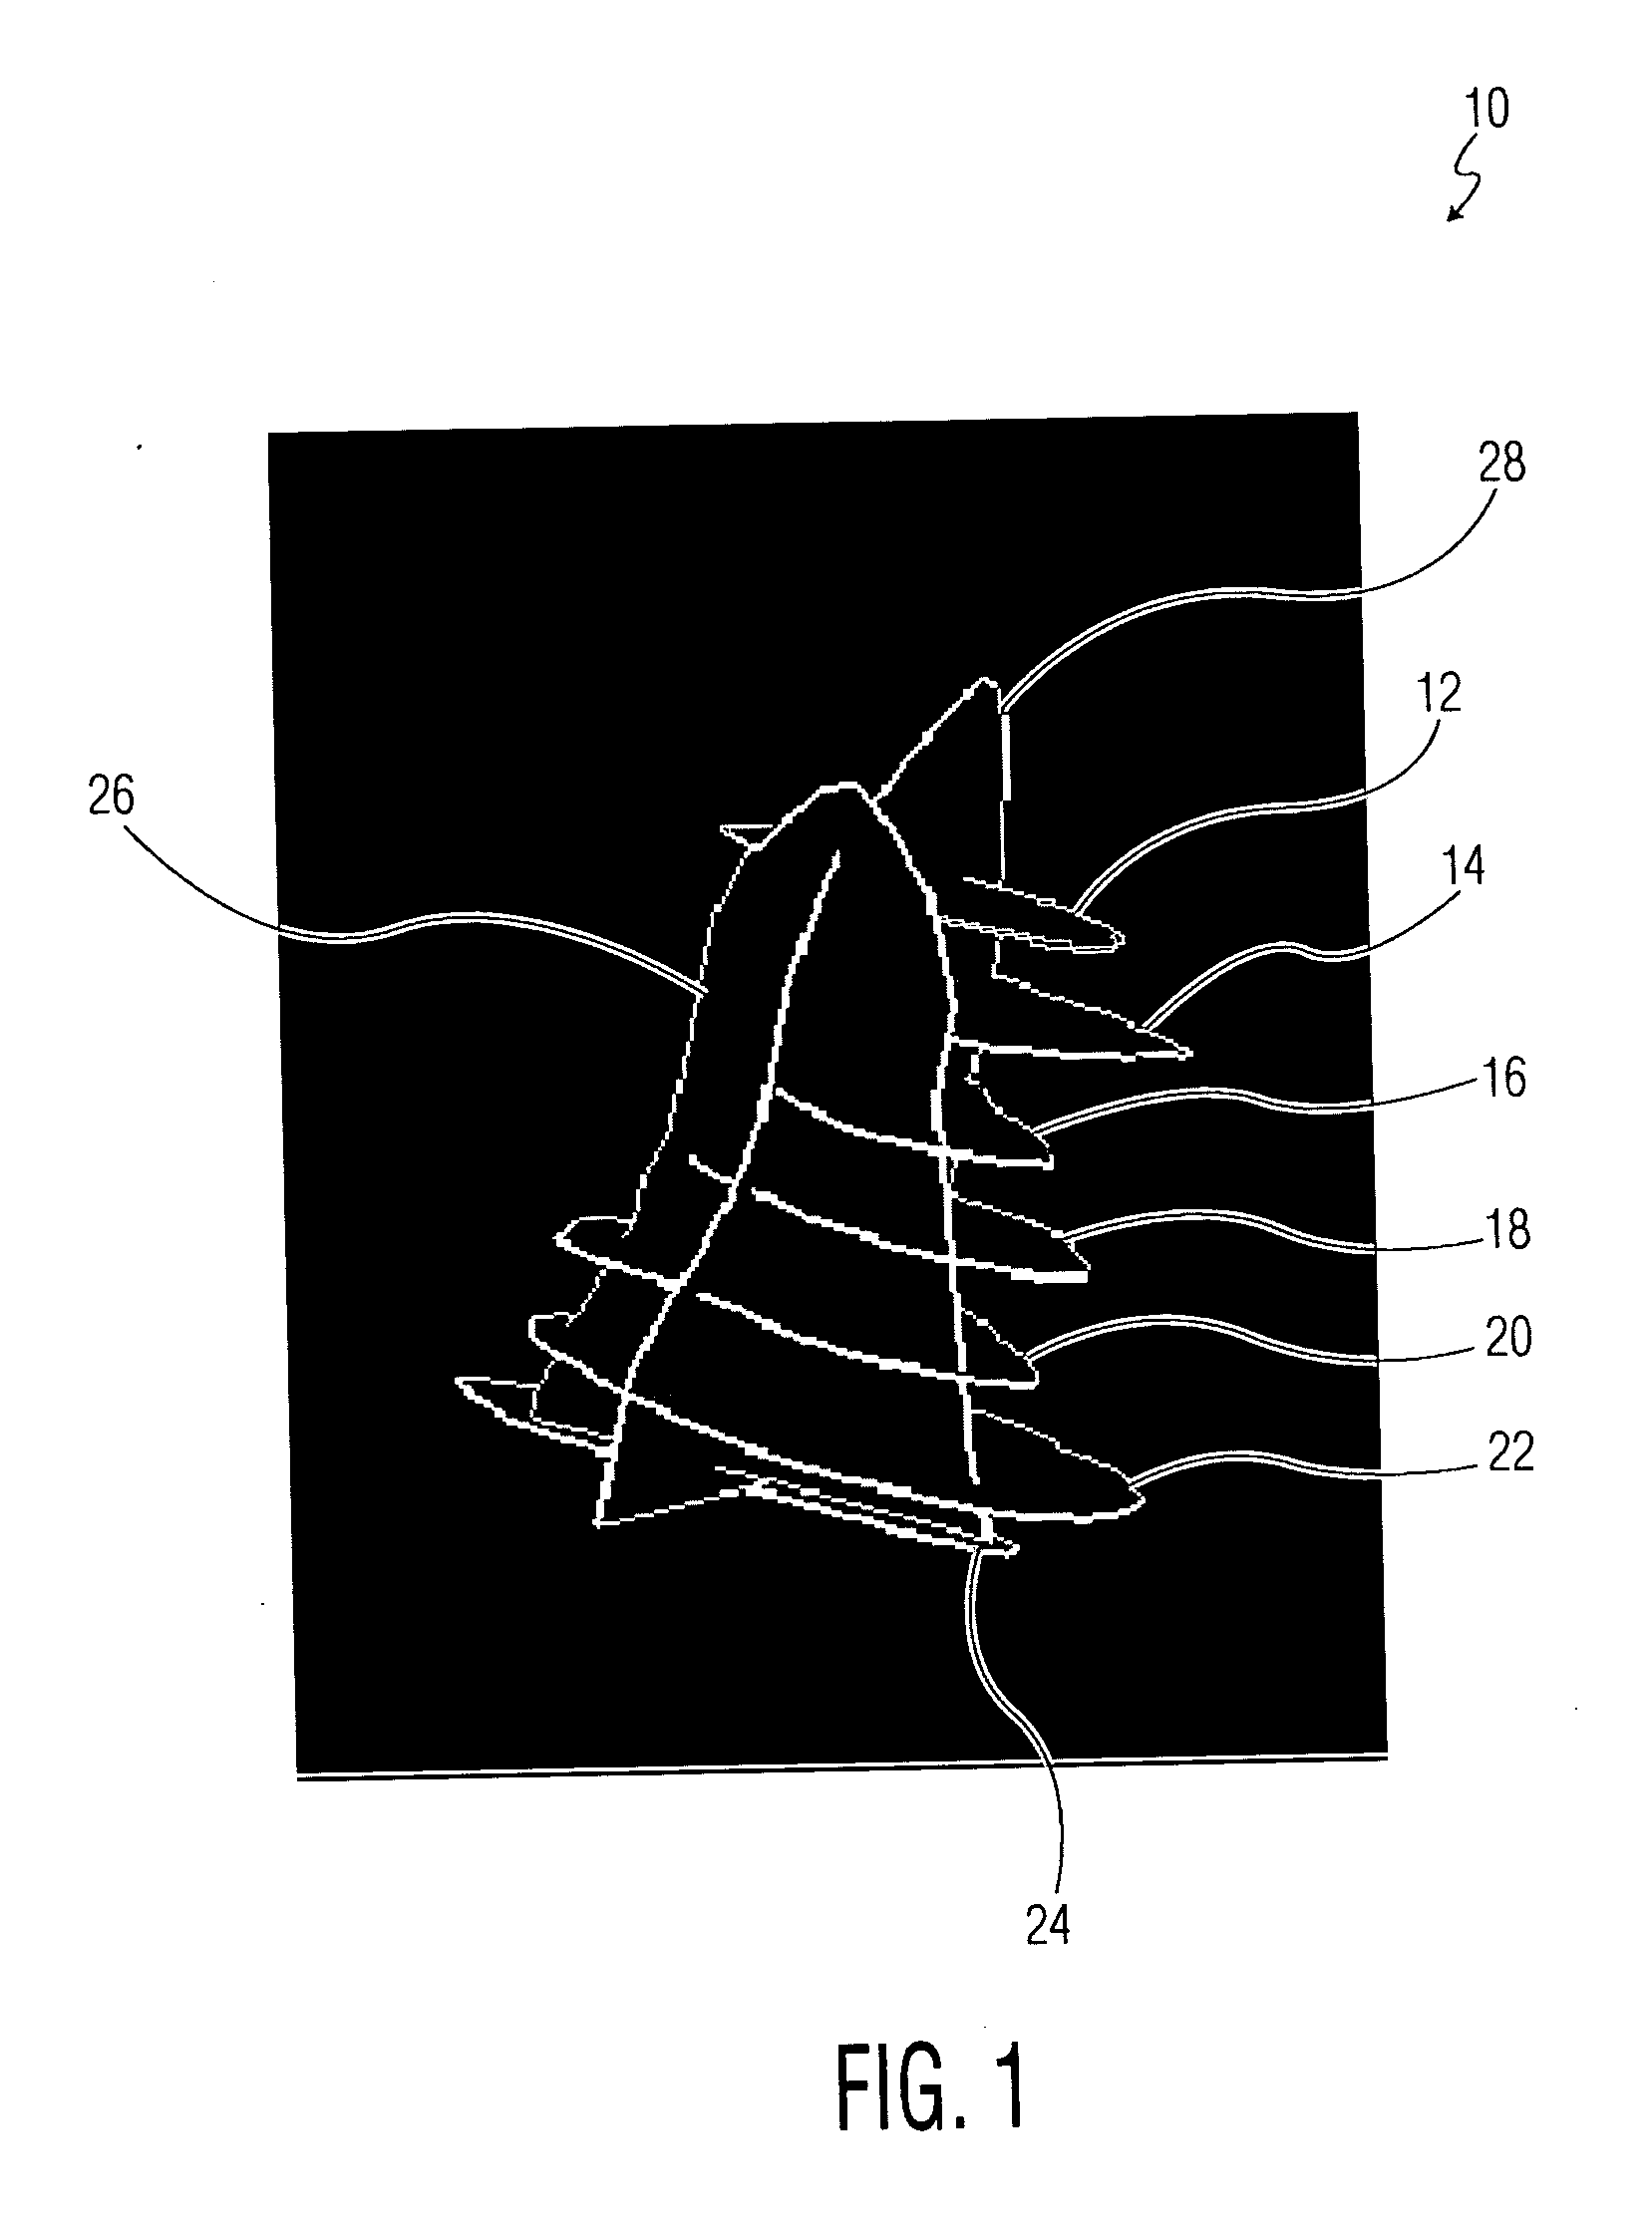 Ultrasound diagnostic imaging system and method for 3D qualitative display of 2D border tracings